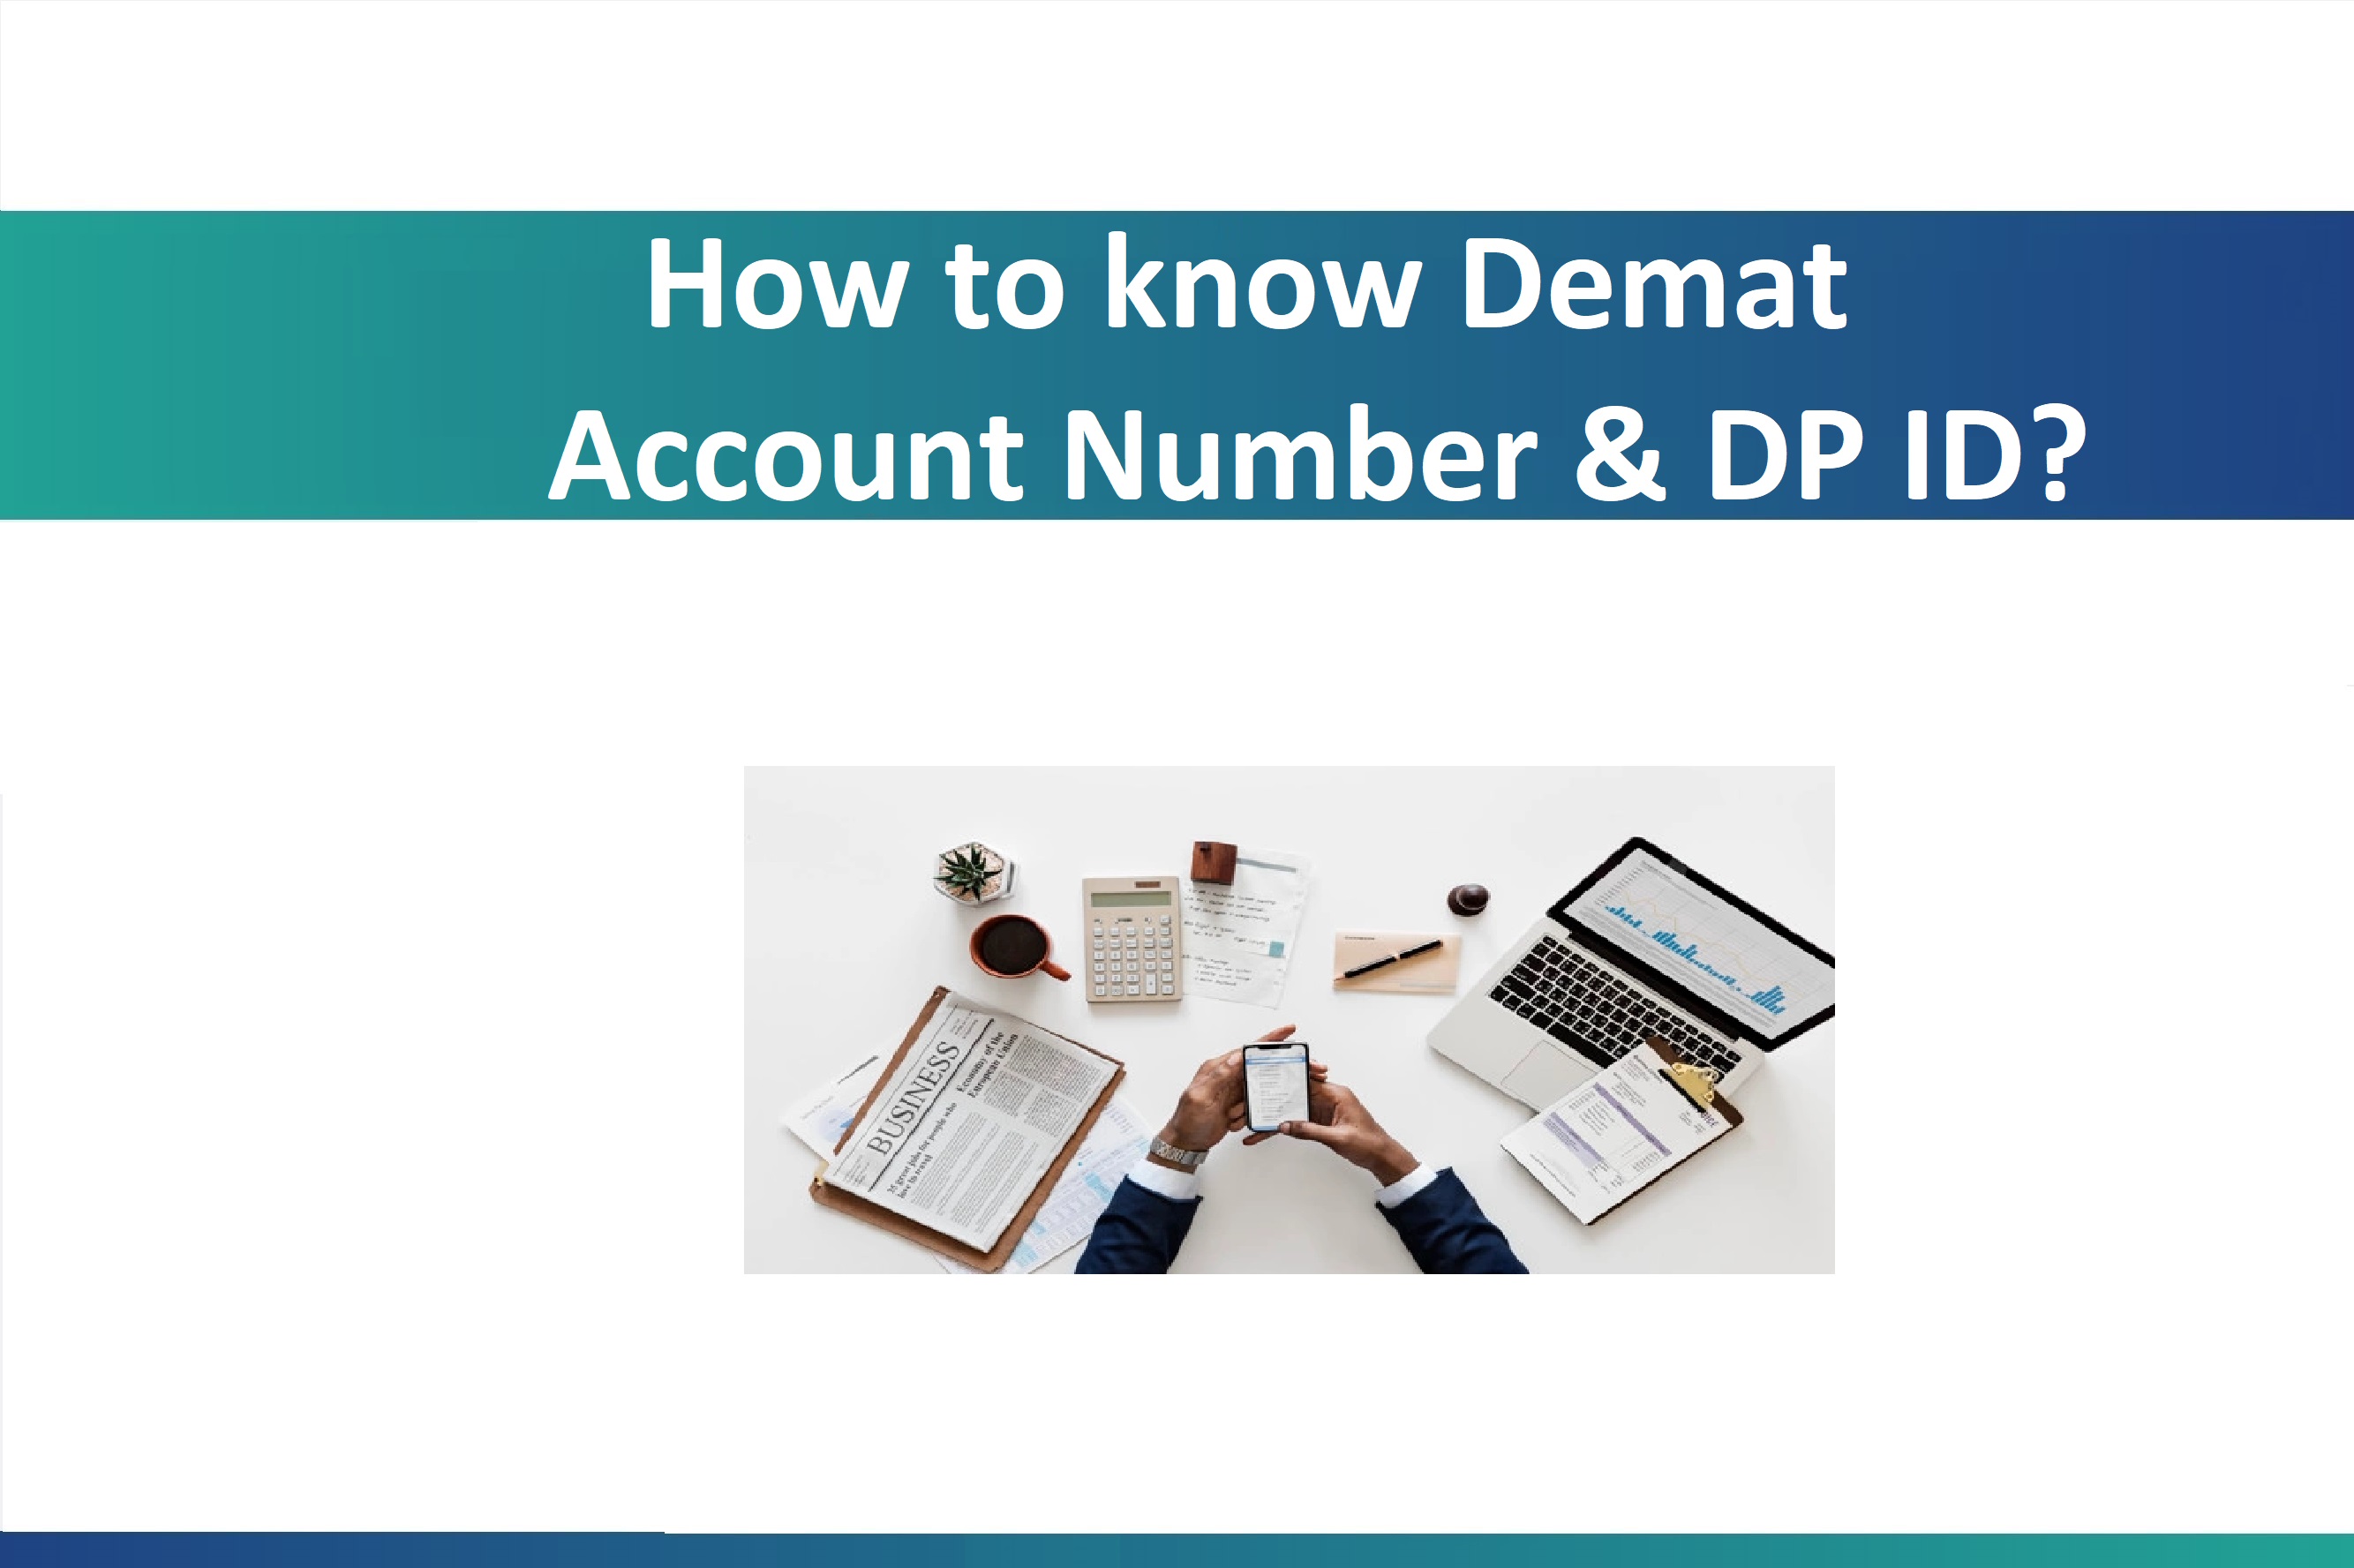 How to know Demat Account Number & DP ID?